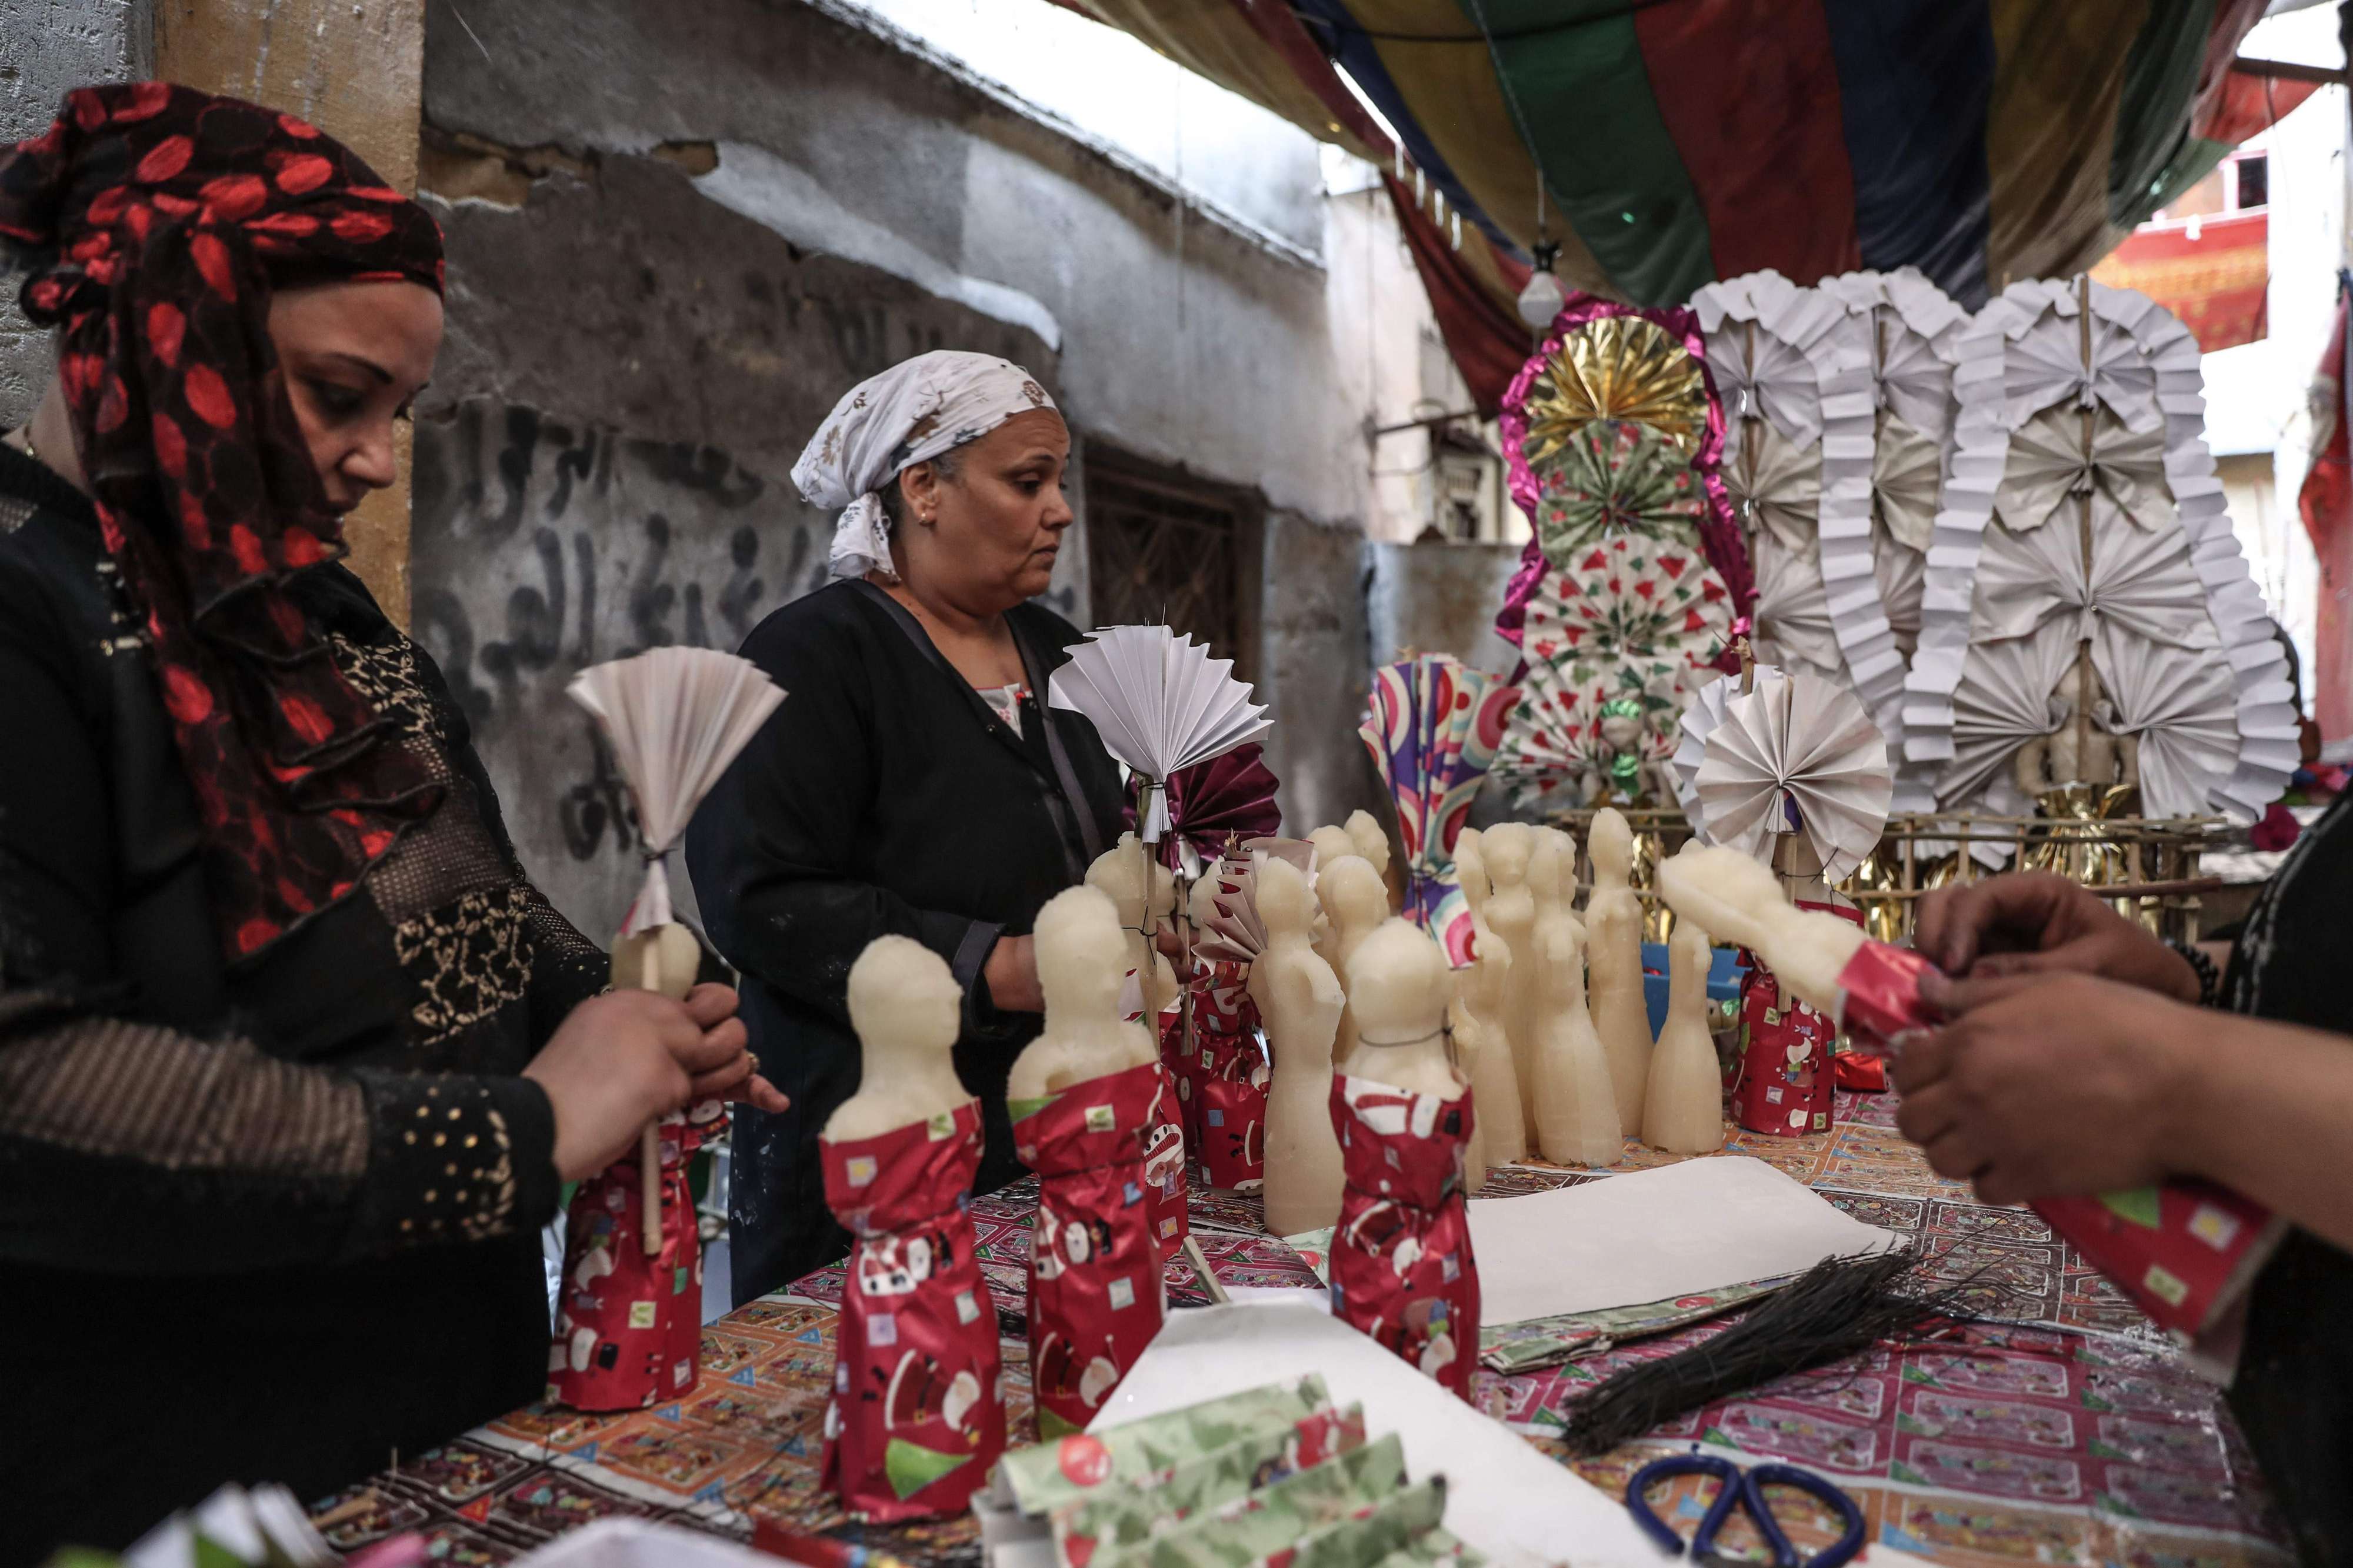  Egyptian women decorate traditional sugar statuettes in the capital Cairo